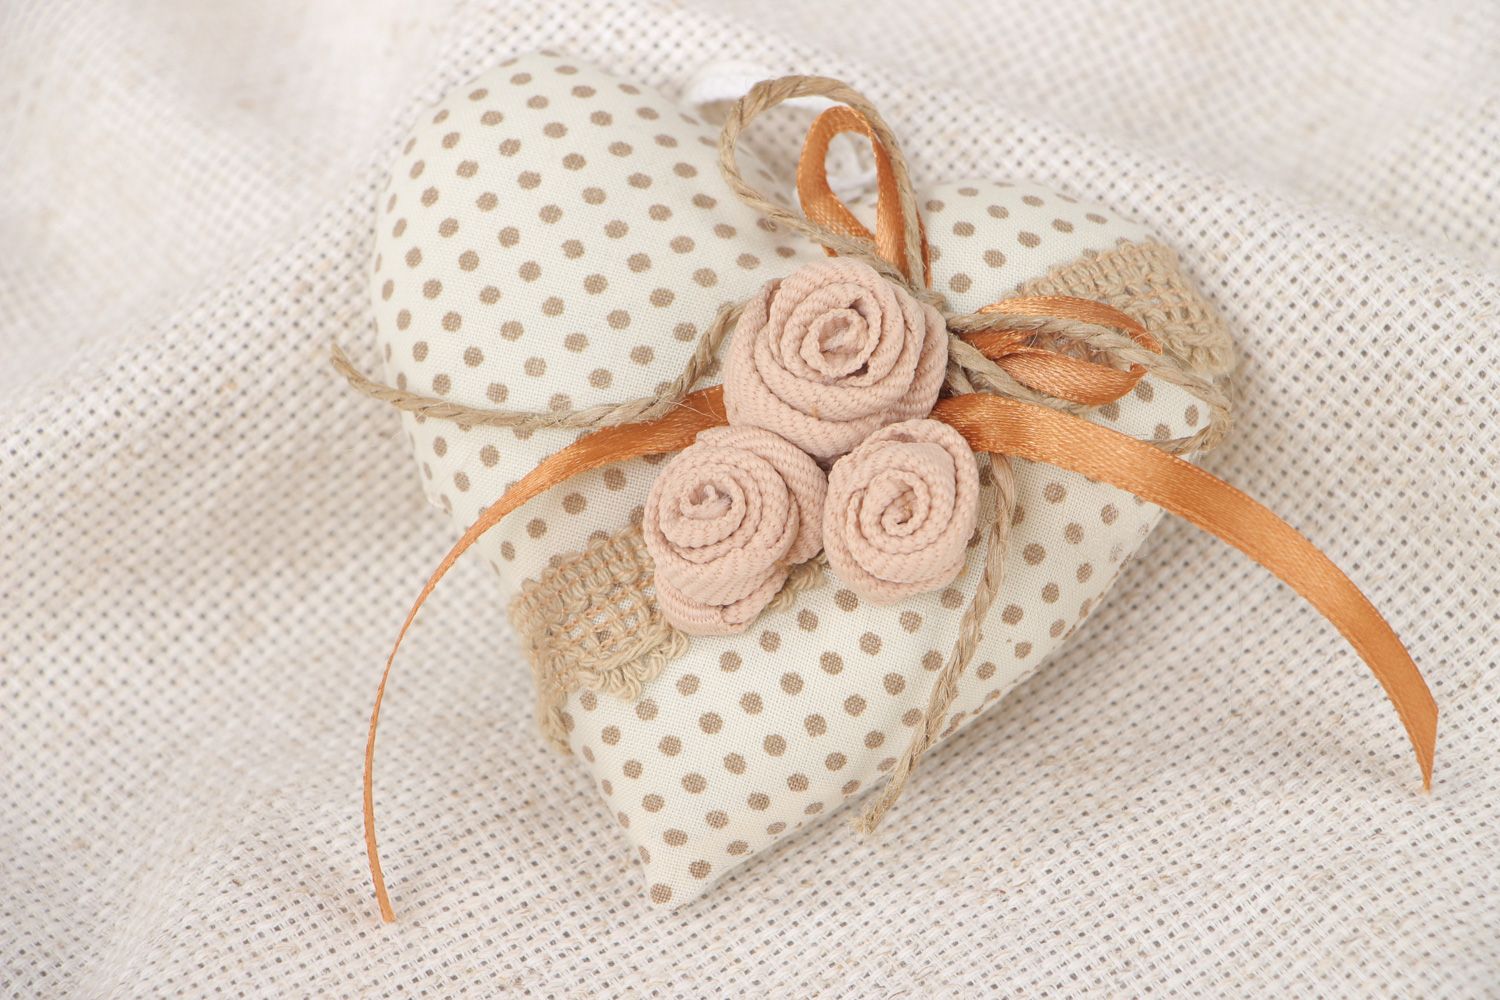 Hand sewn fabric soft heart pendant with ribbons and lace for home interior decor photo 5